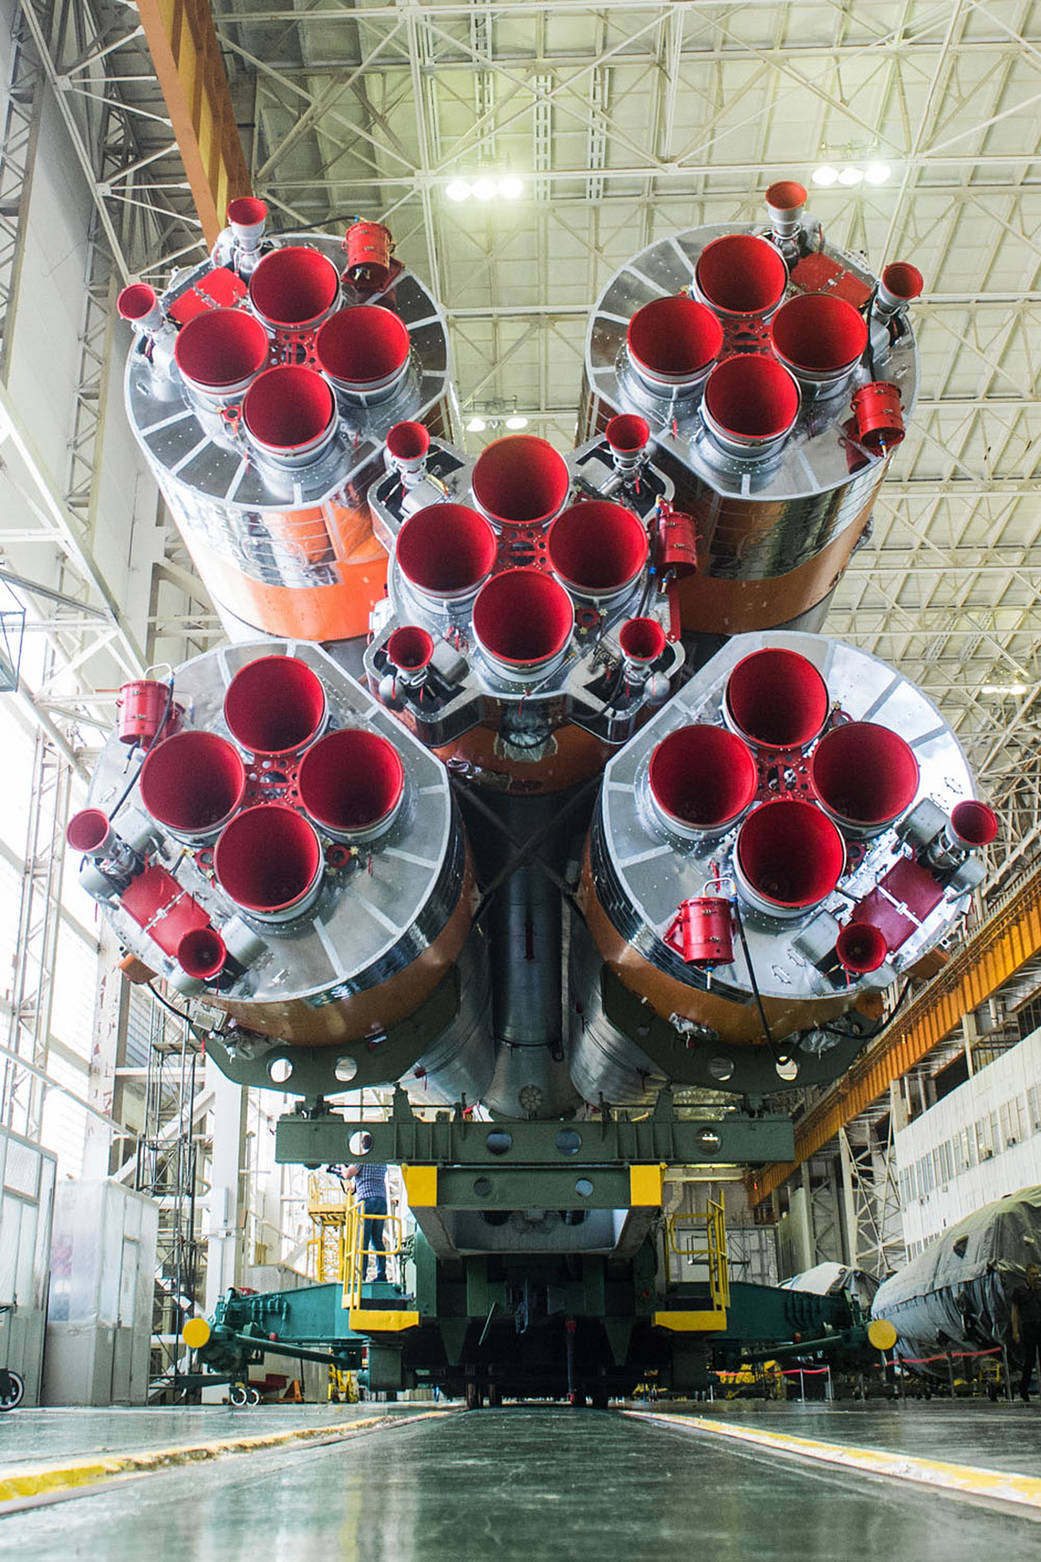 The first stage engines of the Soyuz booster